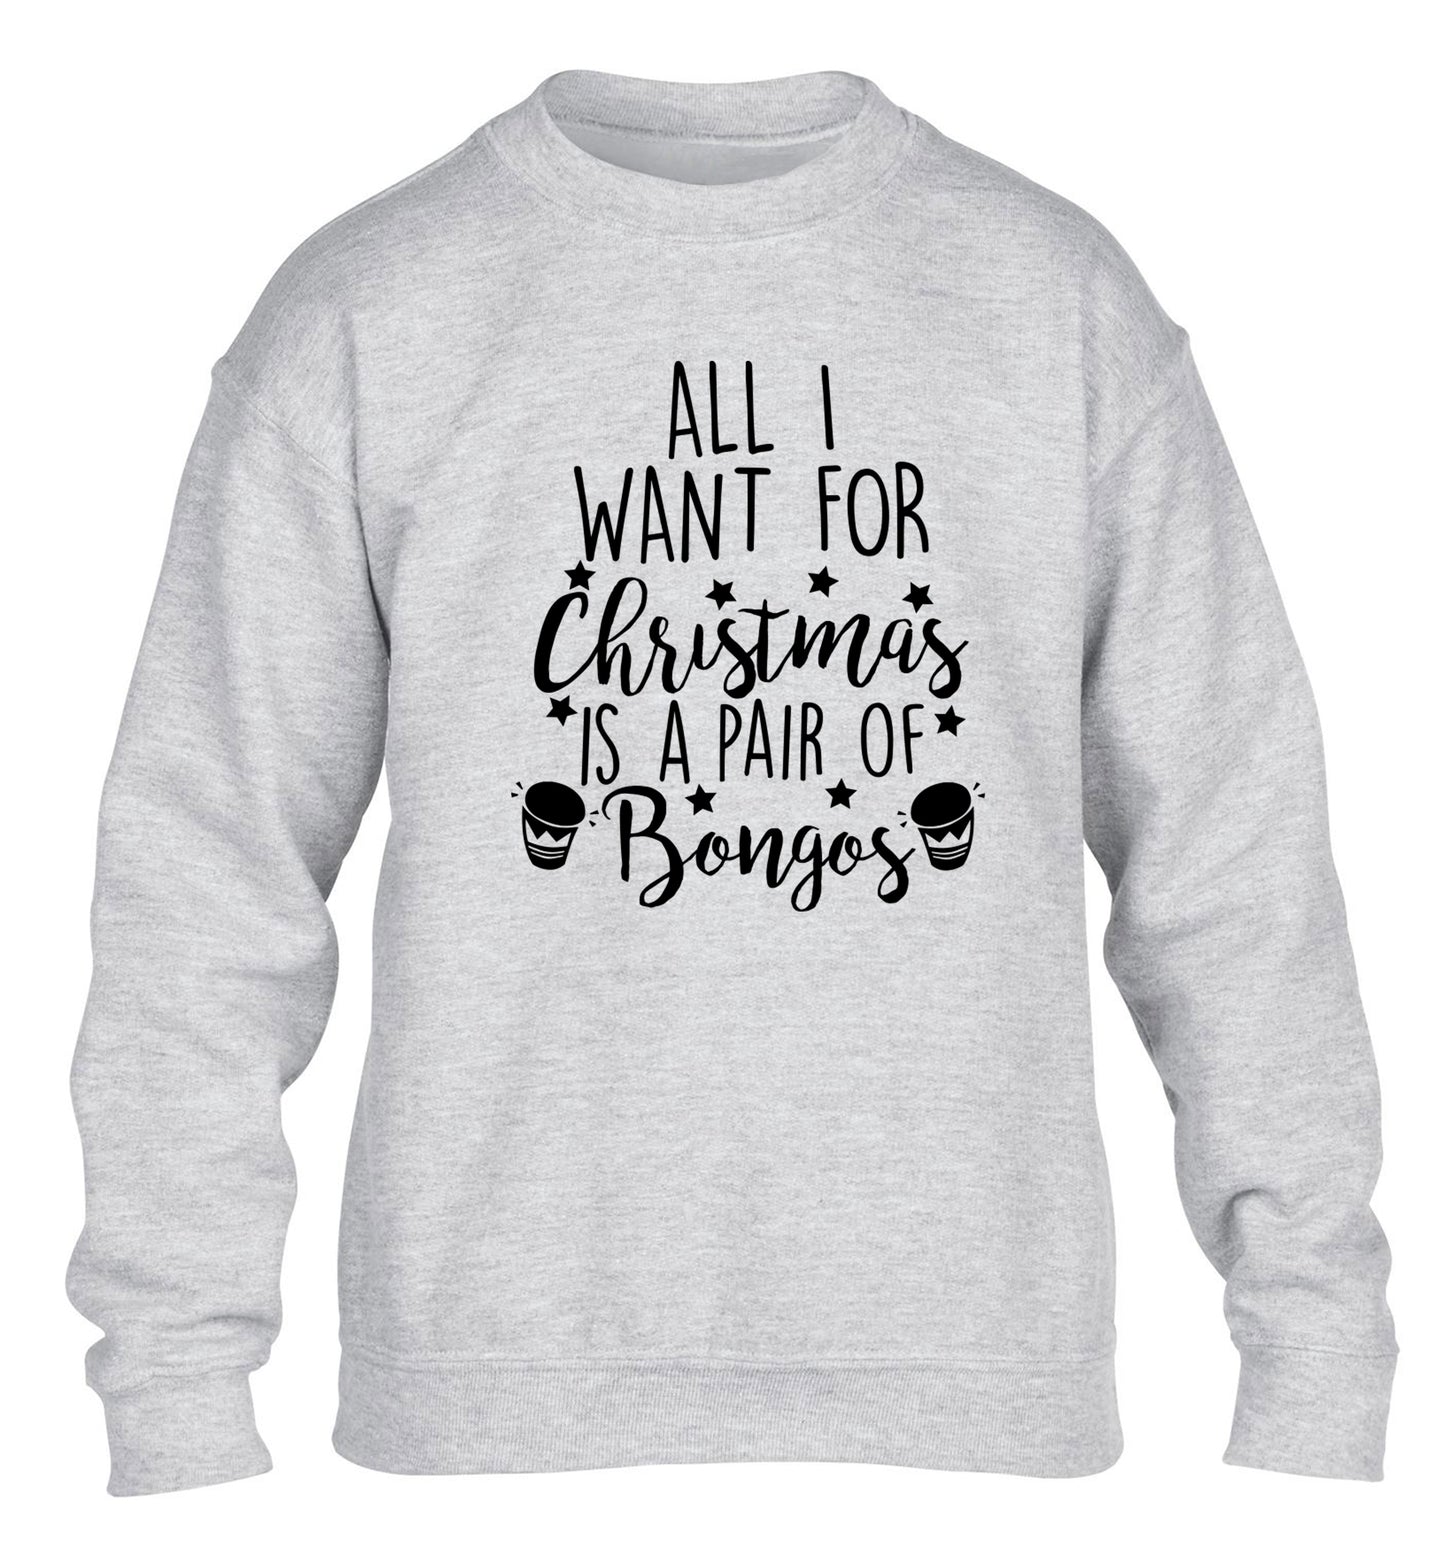 All I want for Christmas is a pair of bongos! children's grey sweater 12-14 Years